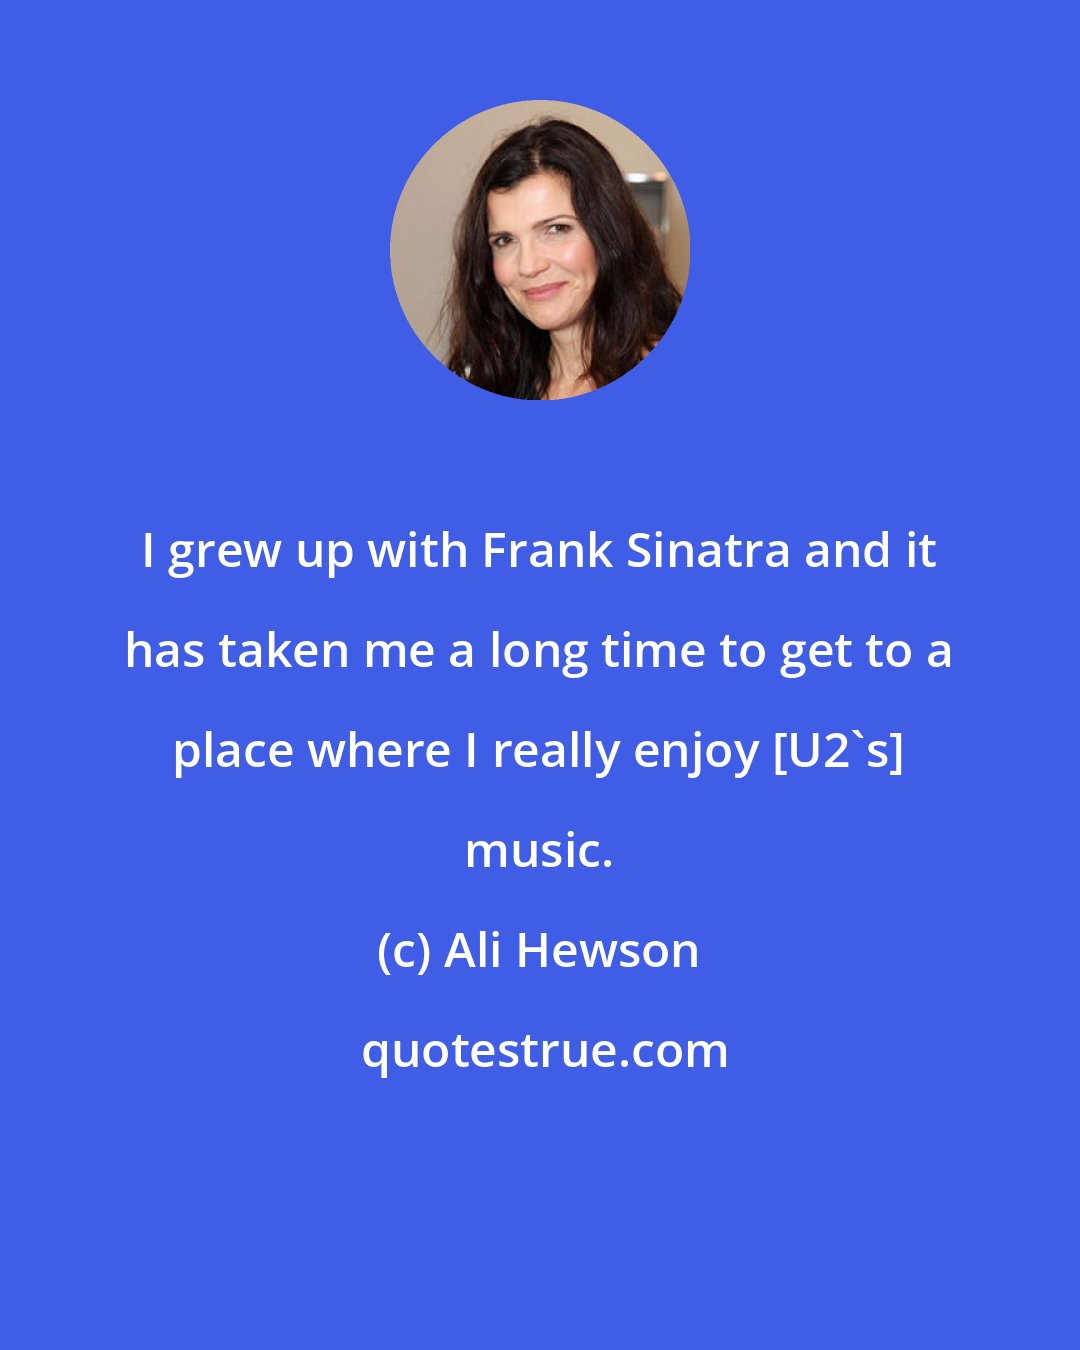 Ali Hewson: I grew up with Frank Sinatra and it has taken me a long time to get to a place where I really enjoy [U2's] music.